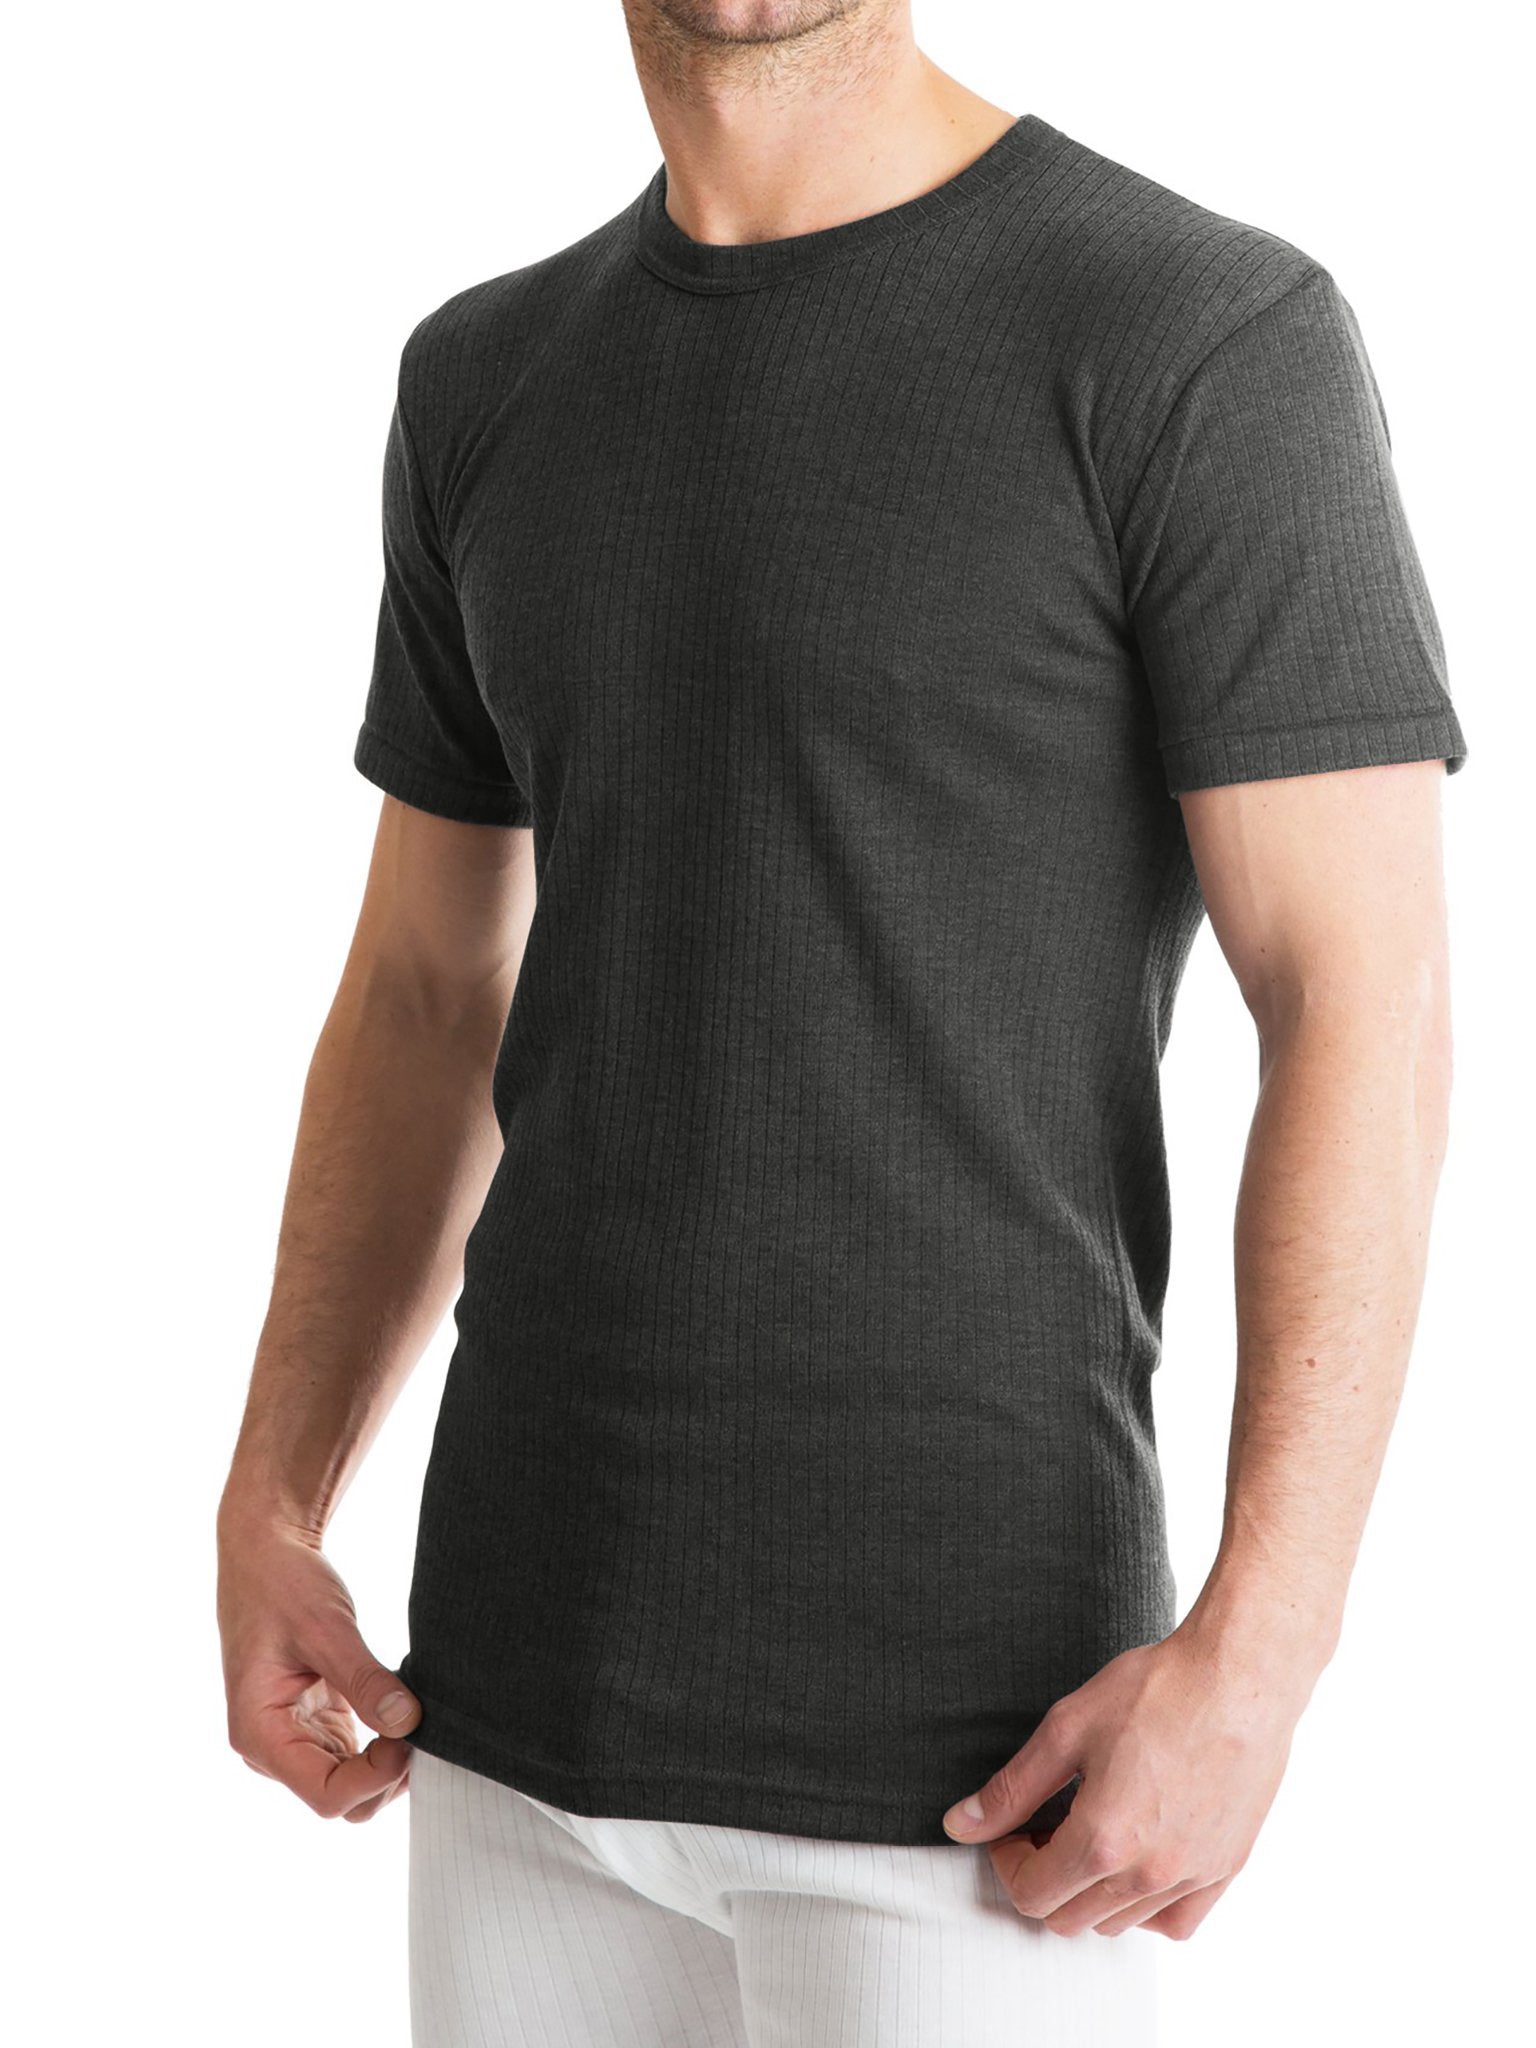 Next Thermal Under Jacket Half Sleeve Shirt For Men-Charcoal-SP1182/RT2297